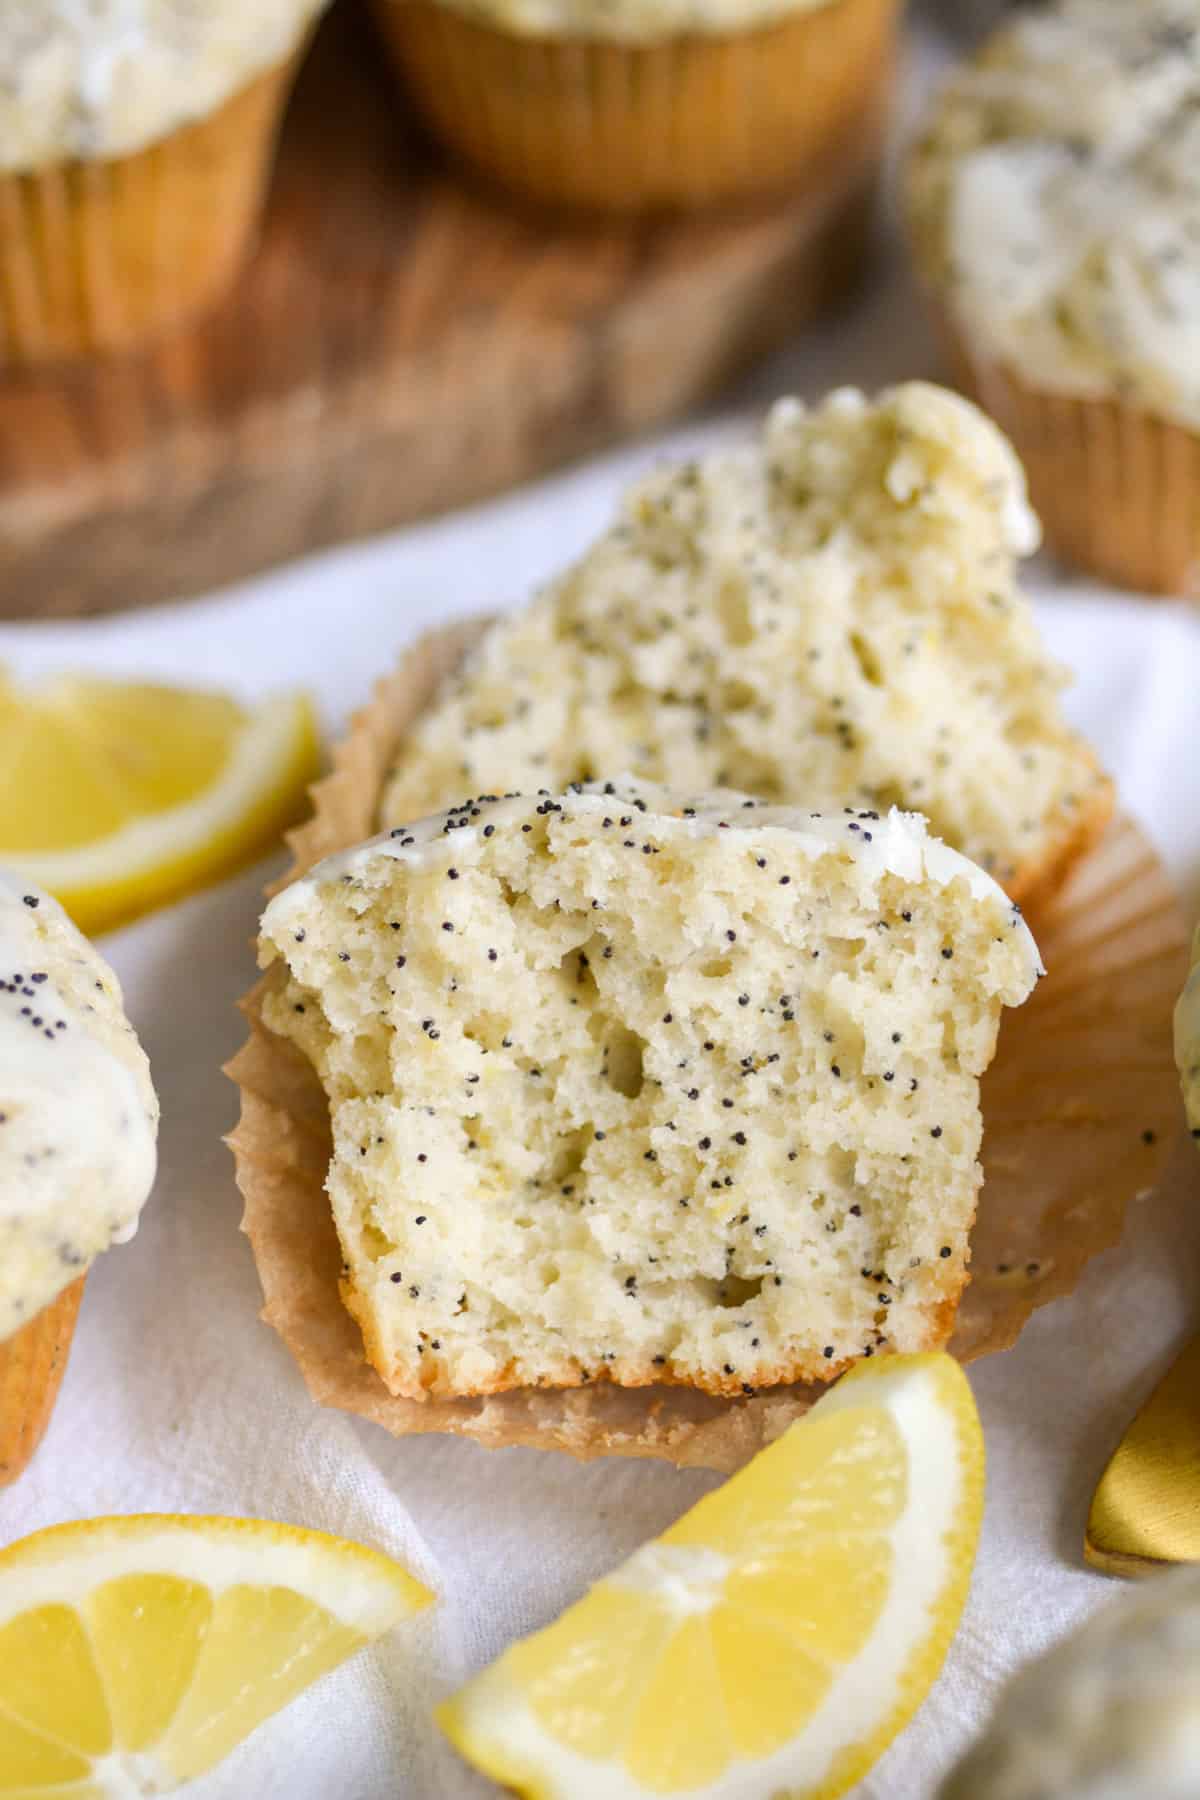 Vegan Lemon Poppyseed Muffin cut in half to show the texture of the inside.